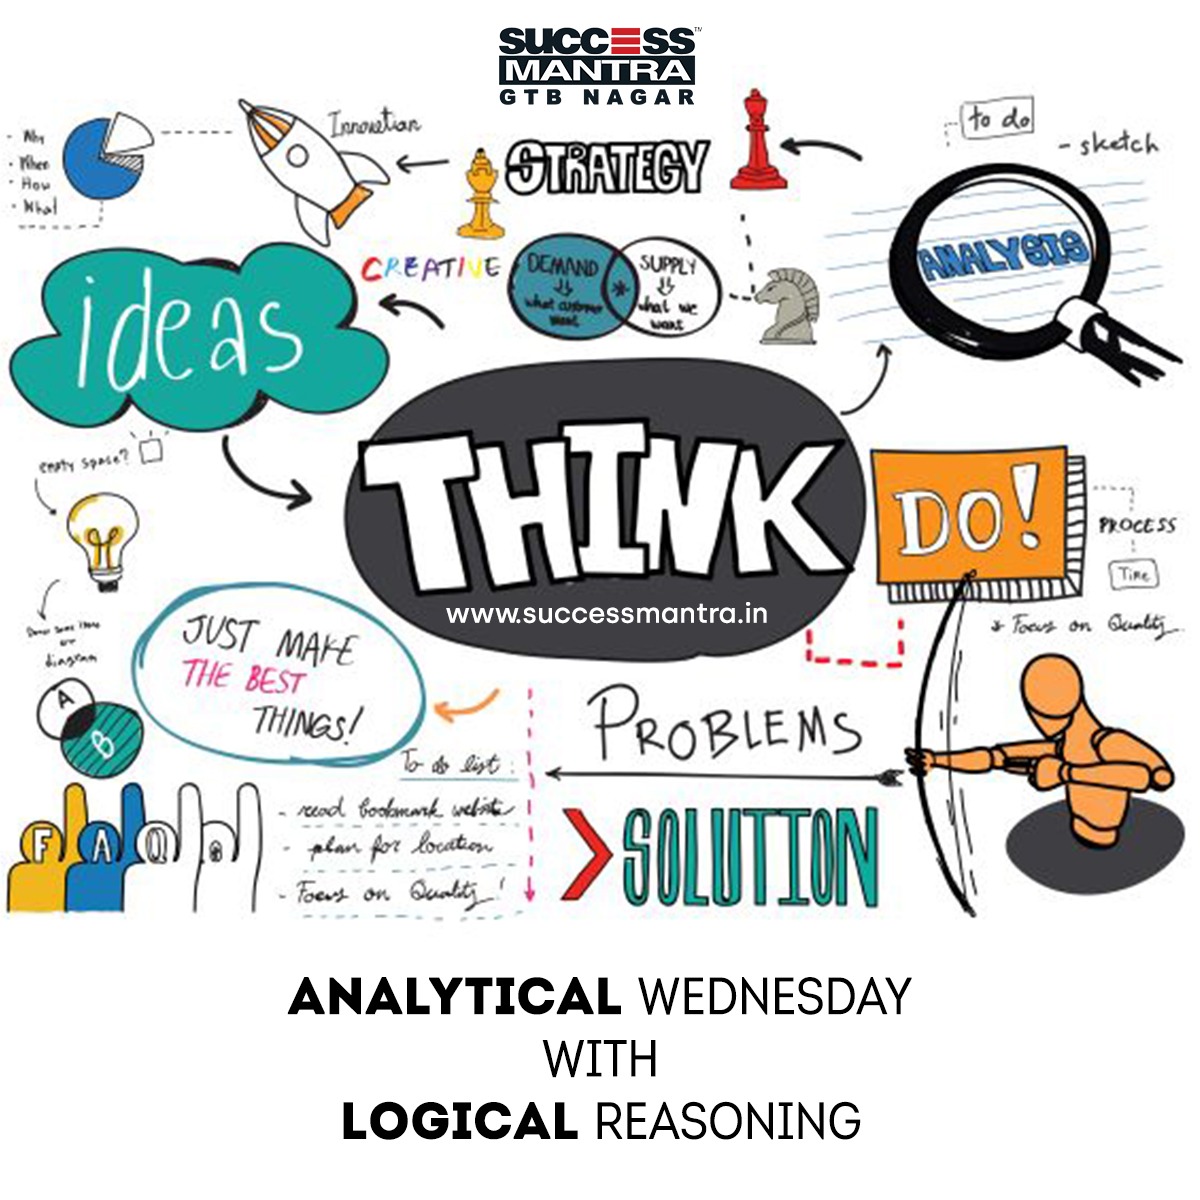 Questions on Logical Reasoning SMLRQ039